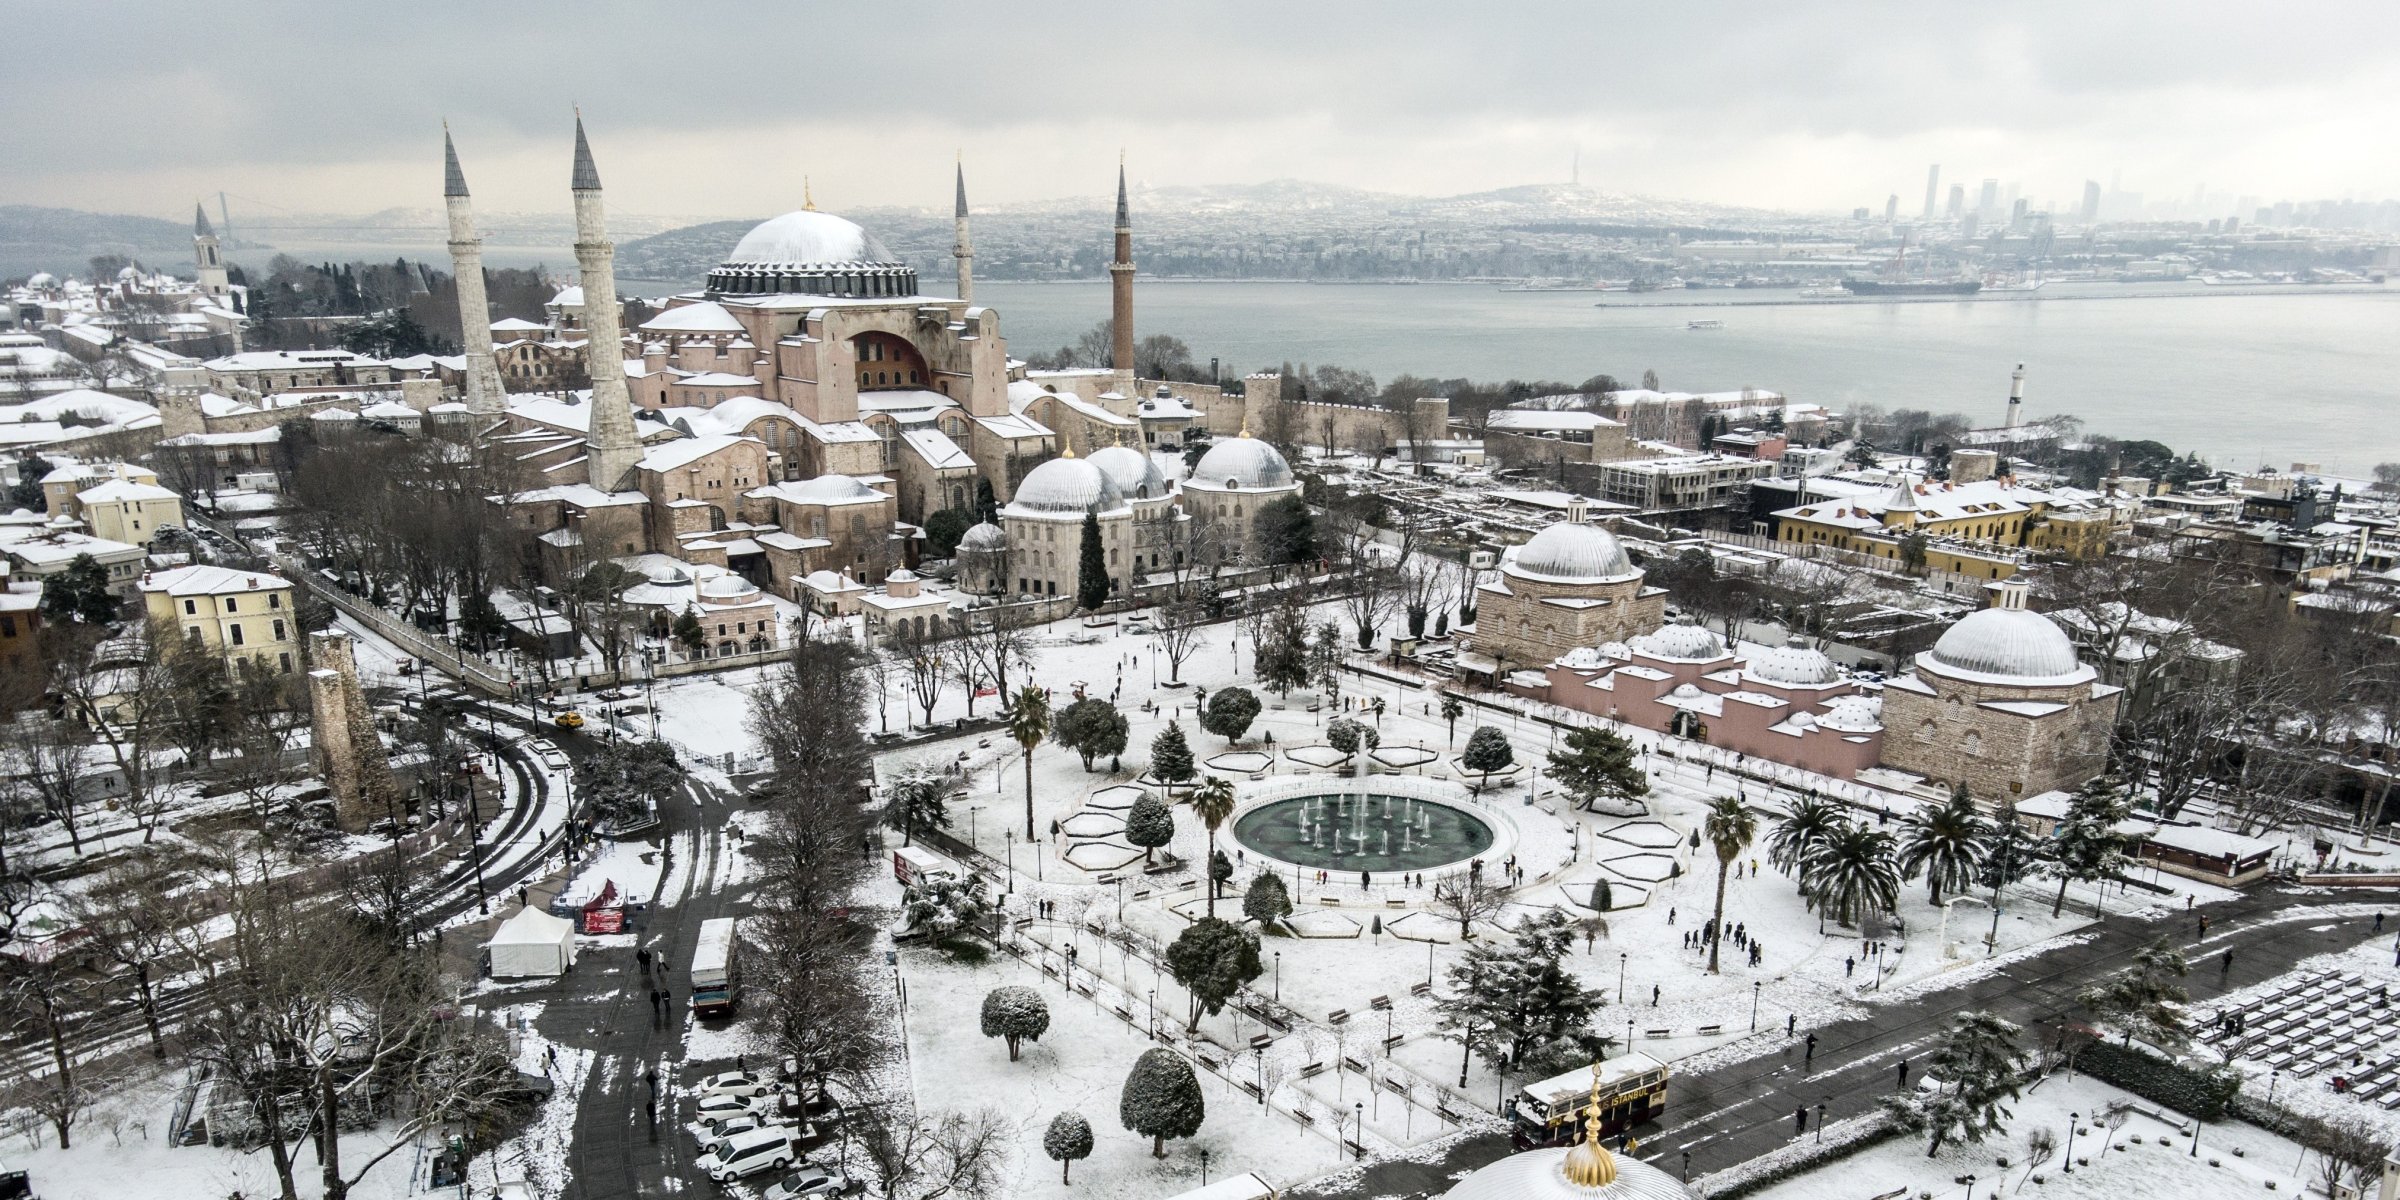 Snowfall blankets Istanbul, boosts water resources | Daily Sabah - Daily Sabah